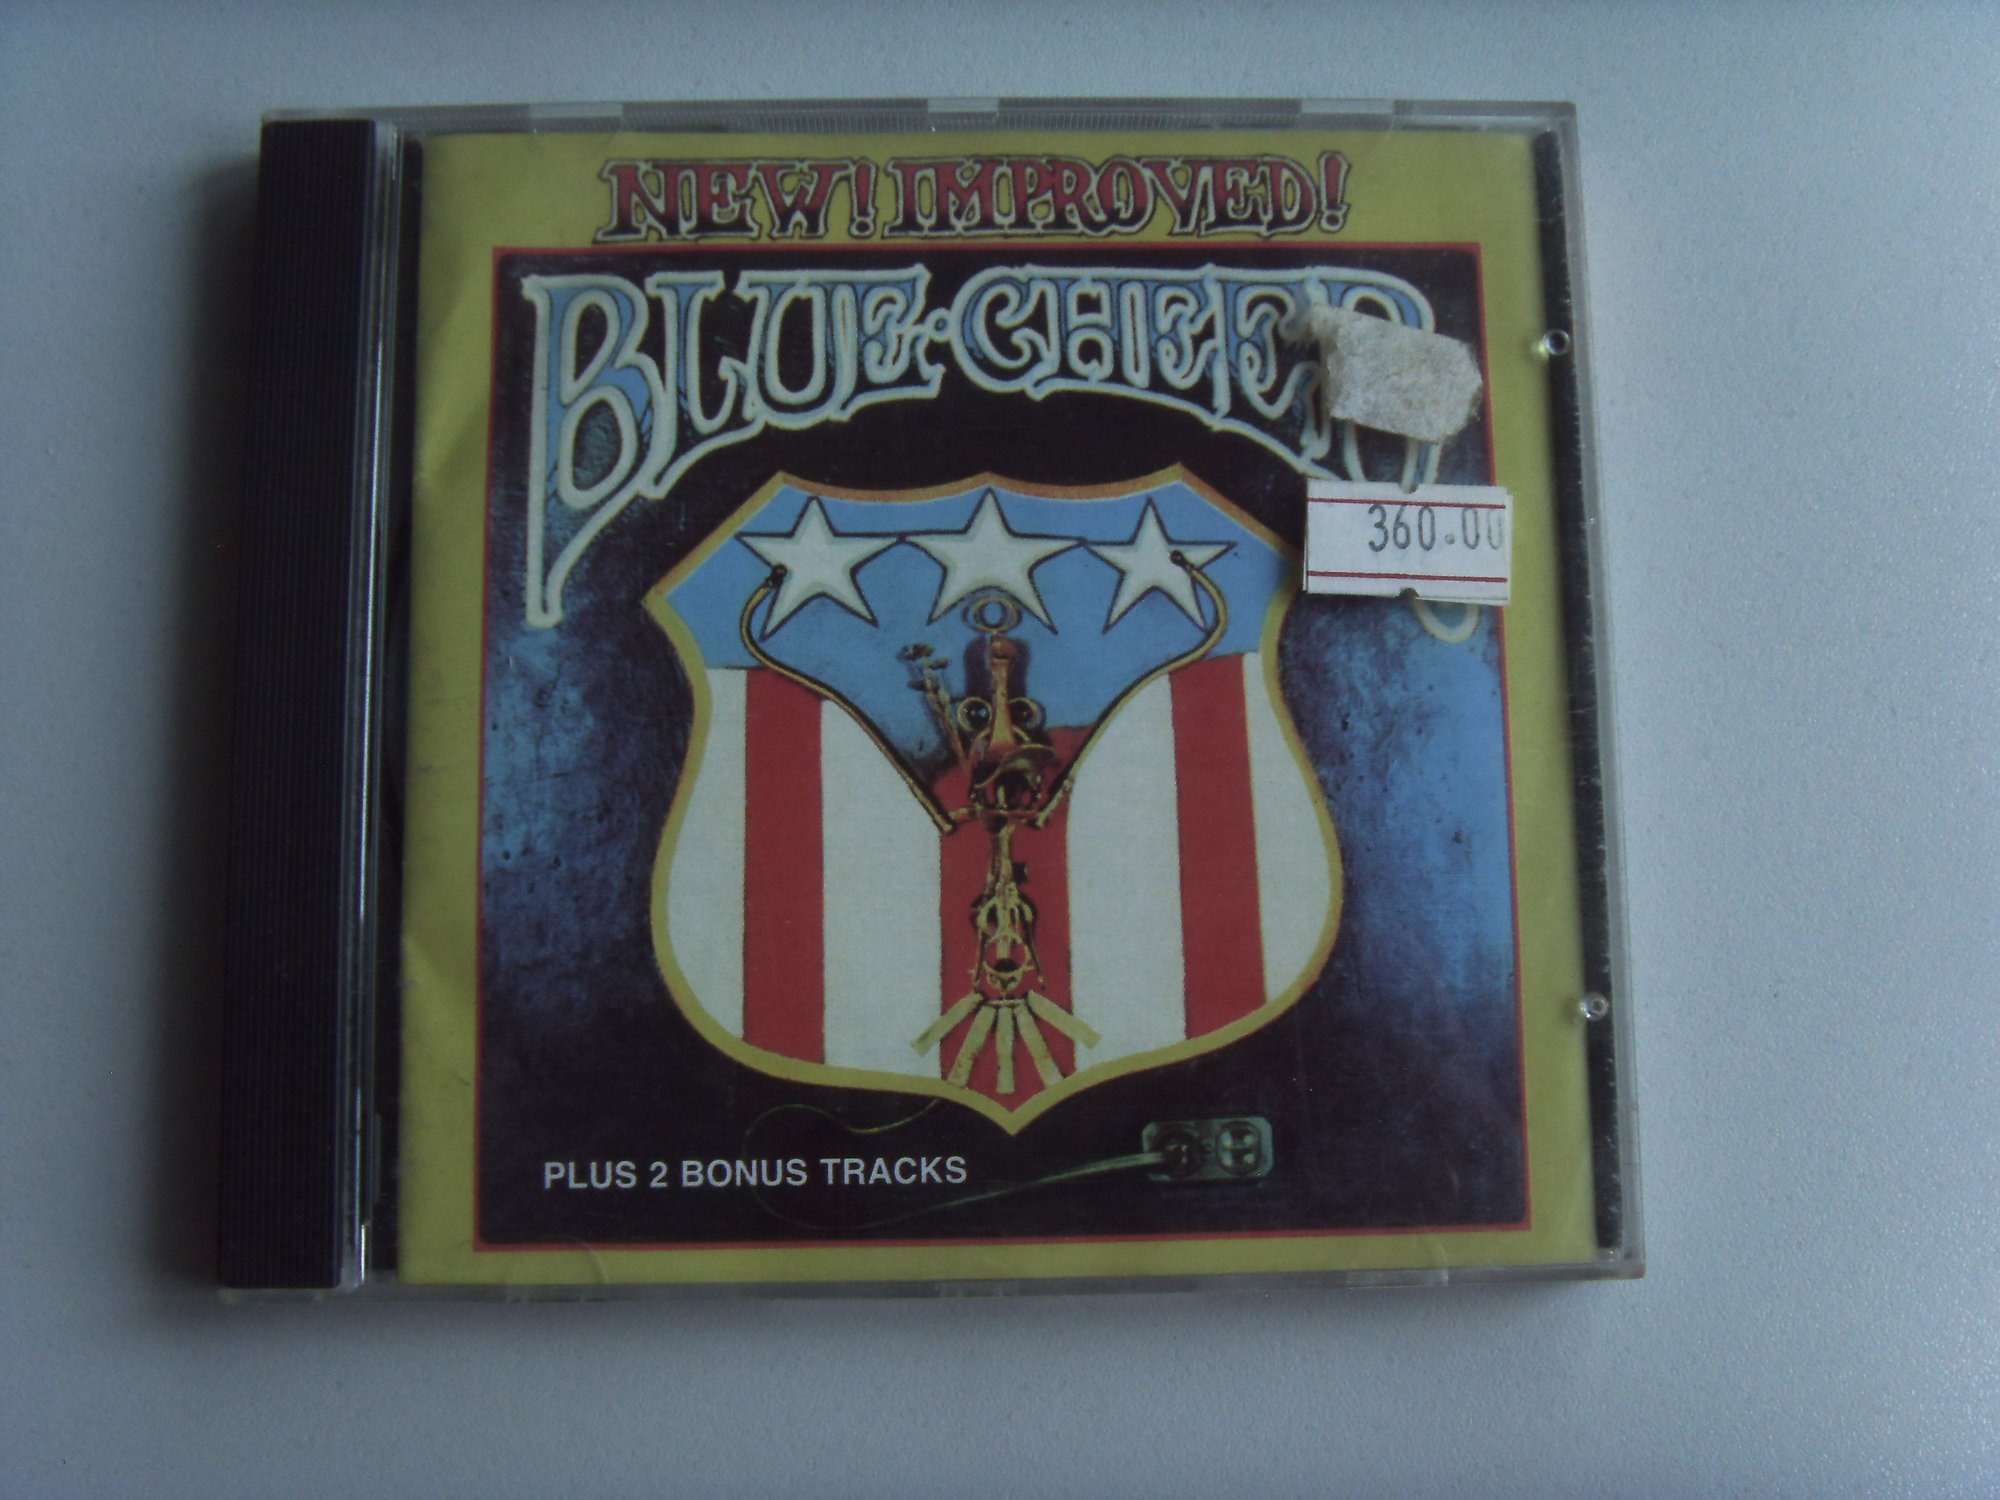 BLUE CHEER New! Improved!